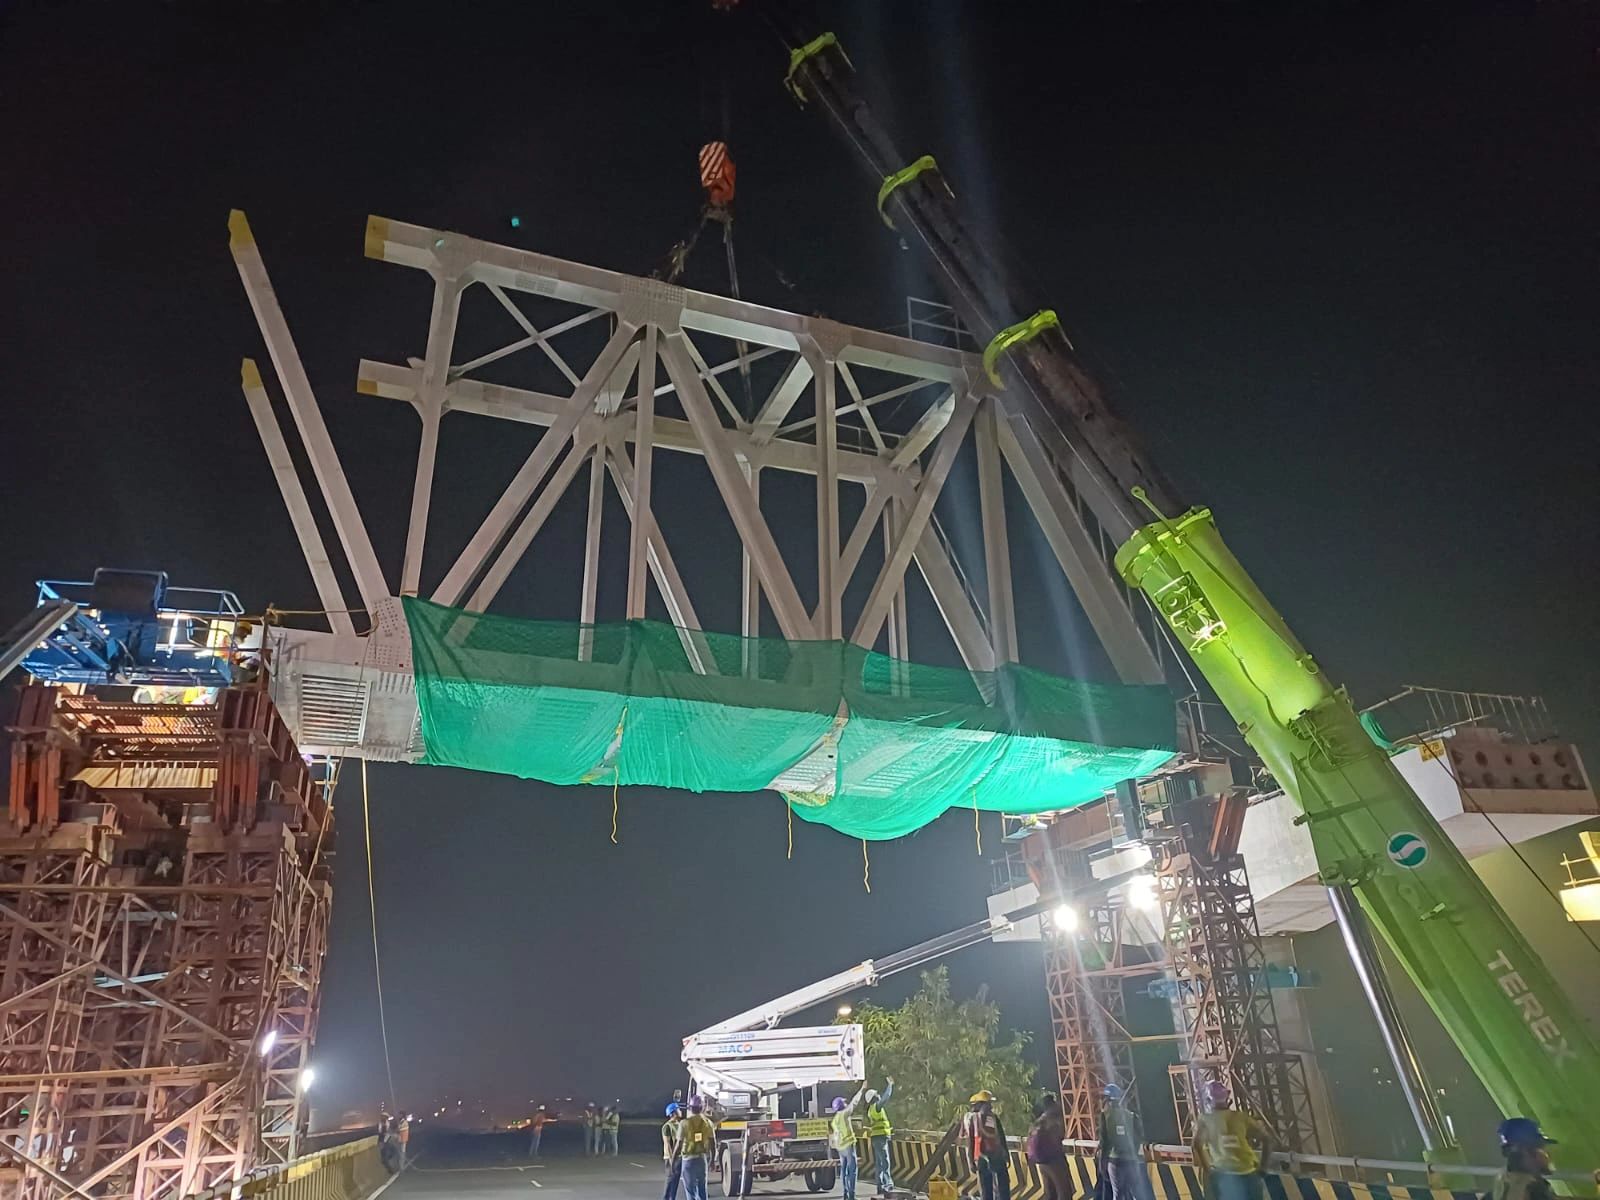 First Open Web Girder Installed on the C4 ECV-02 package of the Chennai Metro Phase 2